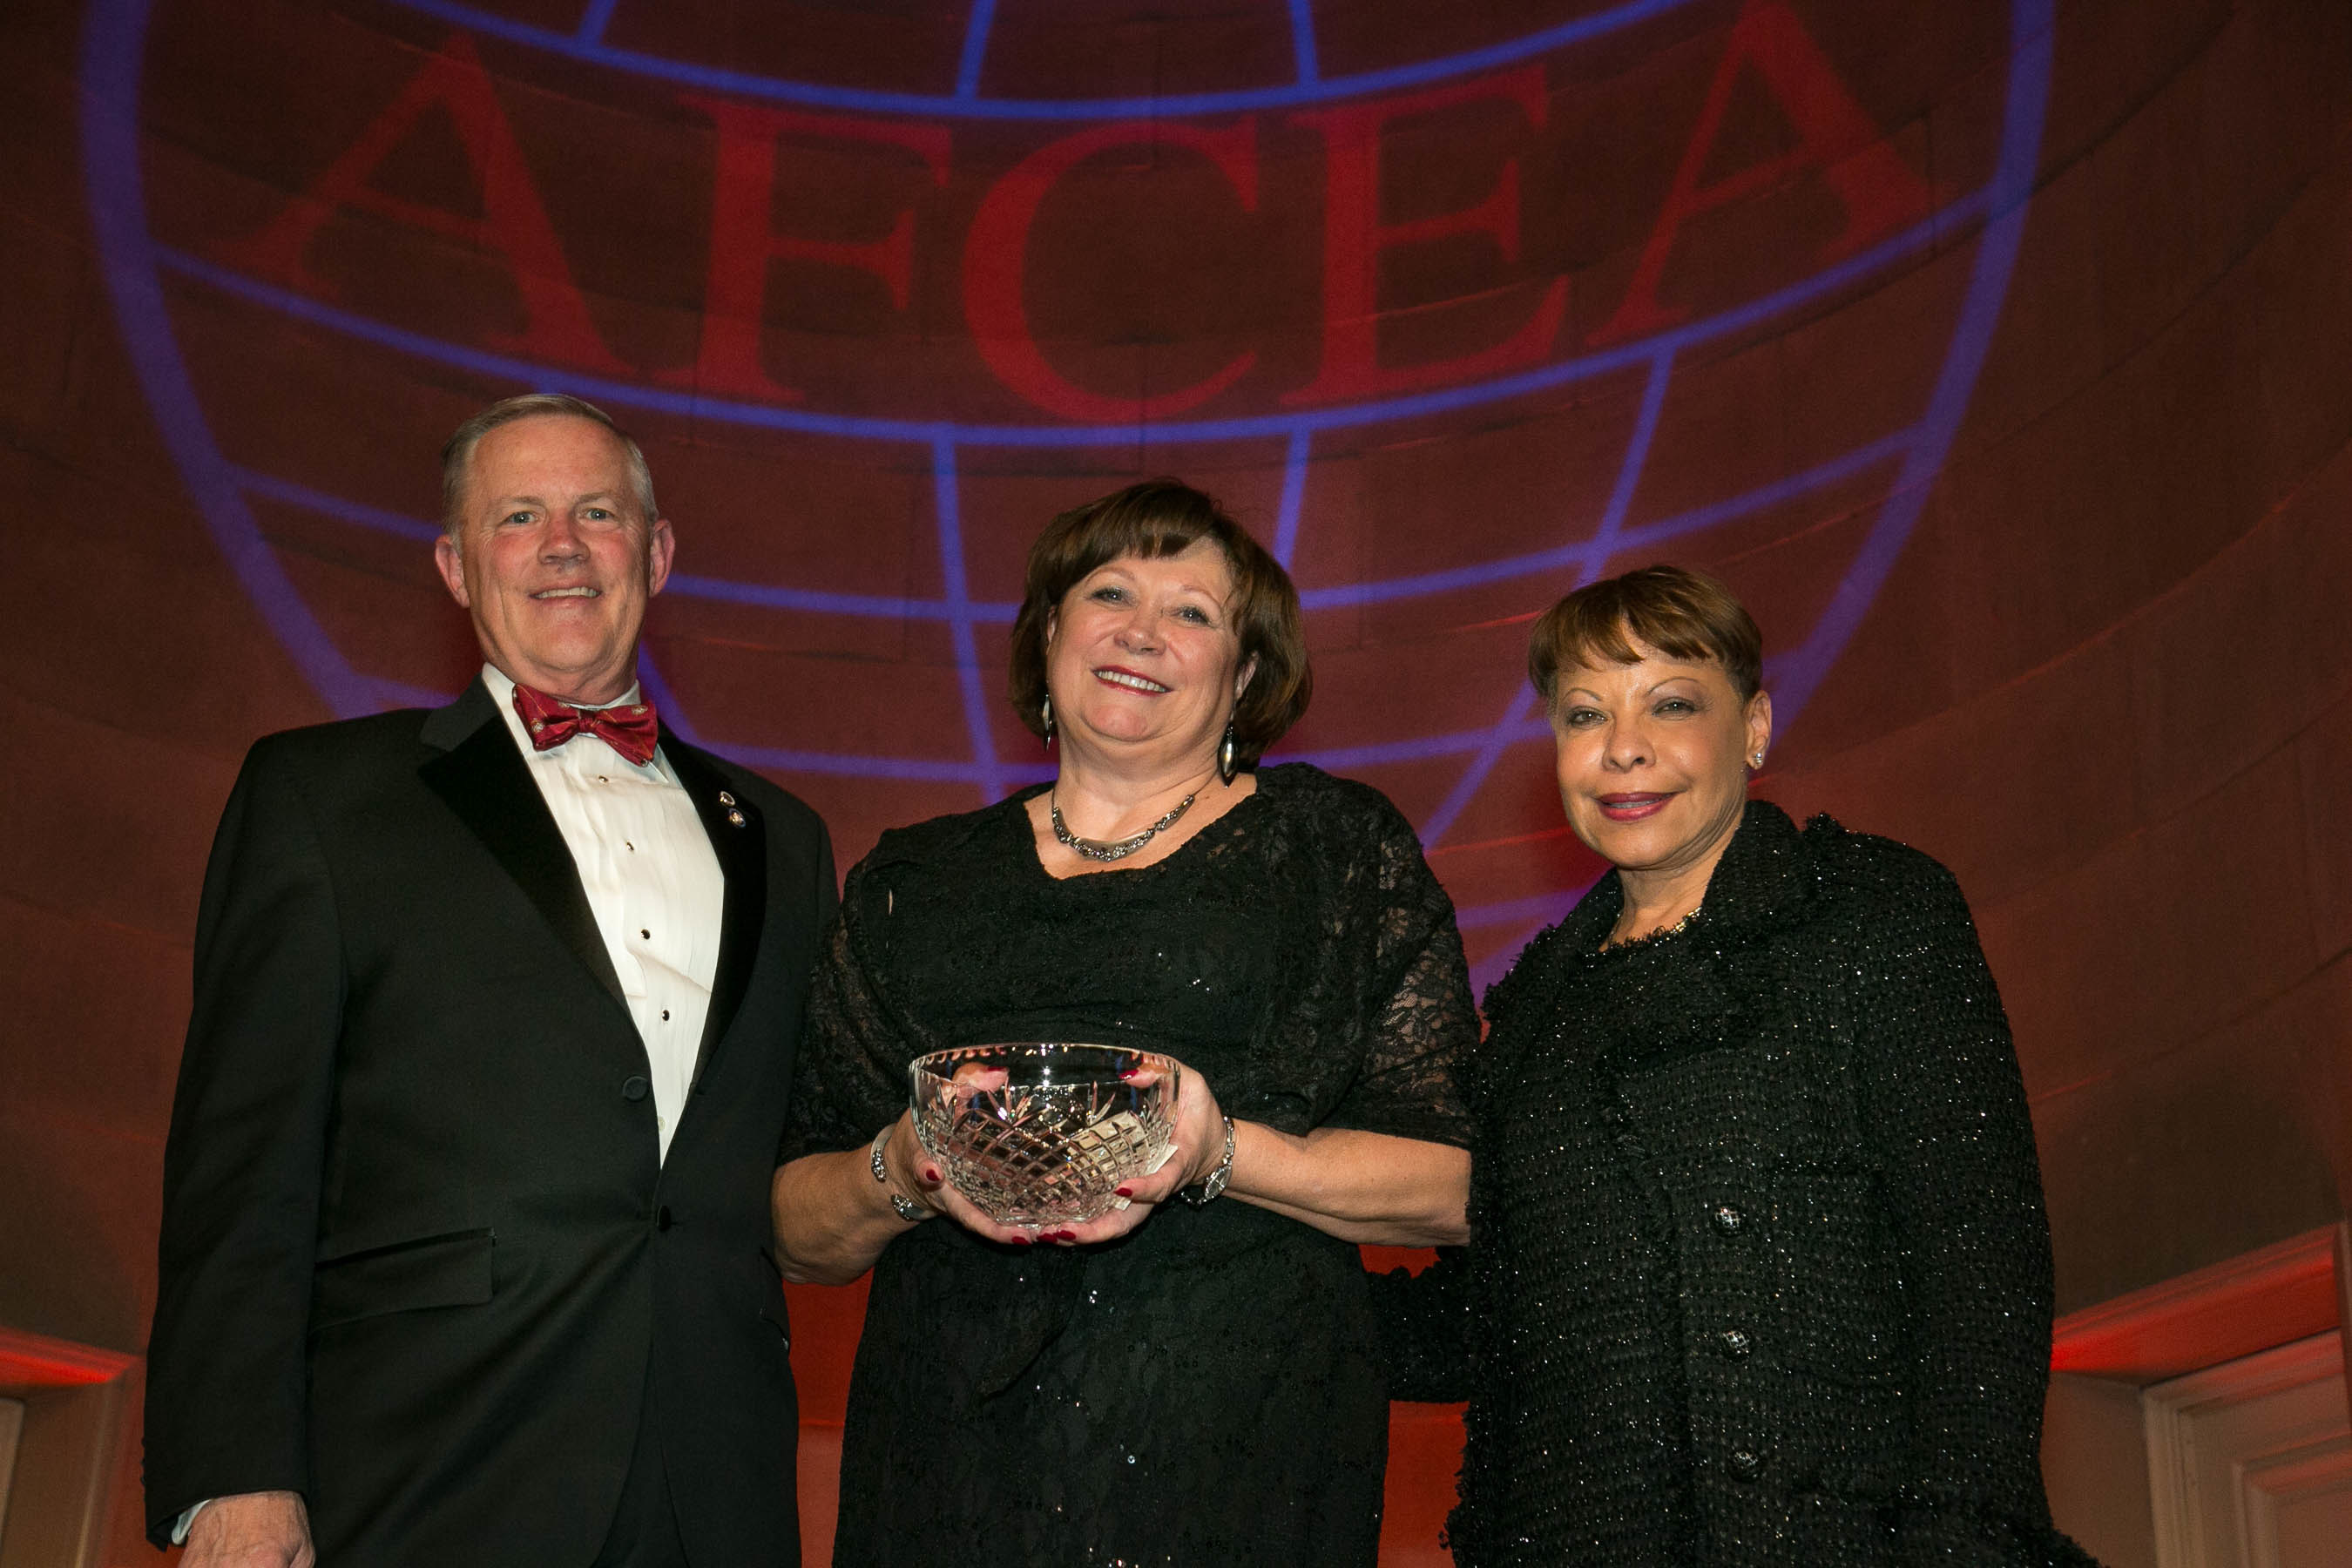 Lt. Gen. Susan Lawrence, USA (Ret.) (c), receives the 2014 Admiral Jon L. Boyes Medal for Distinguished Service to AFCEA from Lt. Gen. Robert M. Shea, USMC (Ret.) (l), president and chief executive officer, AFCEA International, and Linda Gooden, chair of the board, AFCEA International.